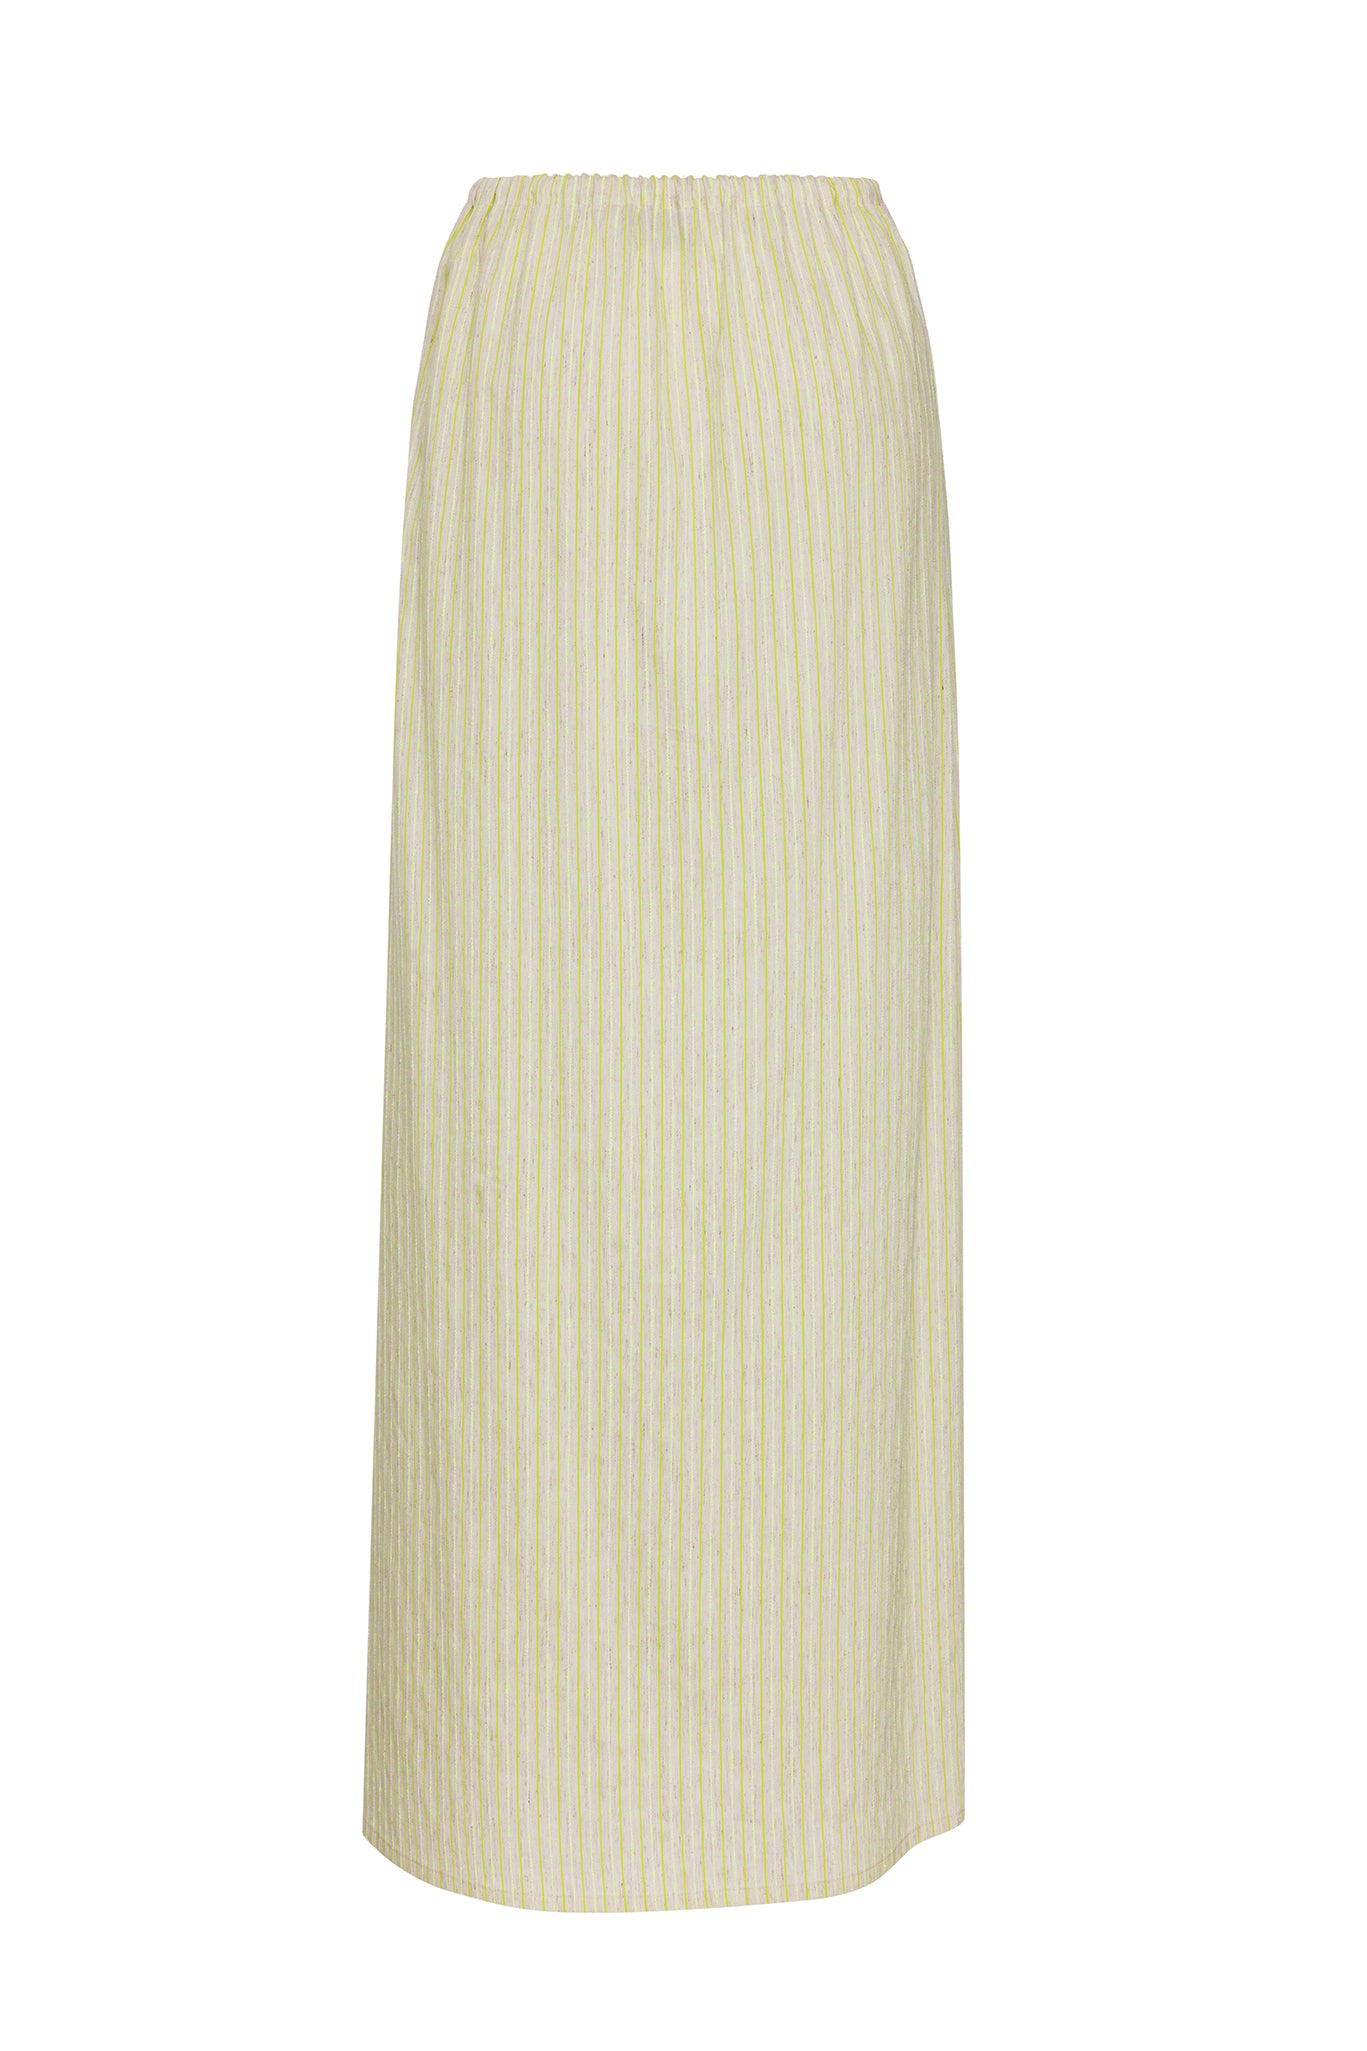 LIME STRIPED SKIRT WITH NAZAR BEADS